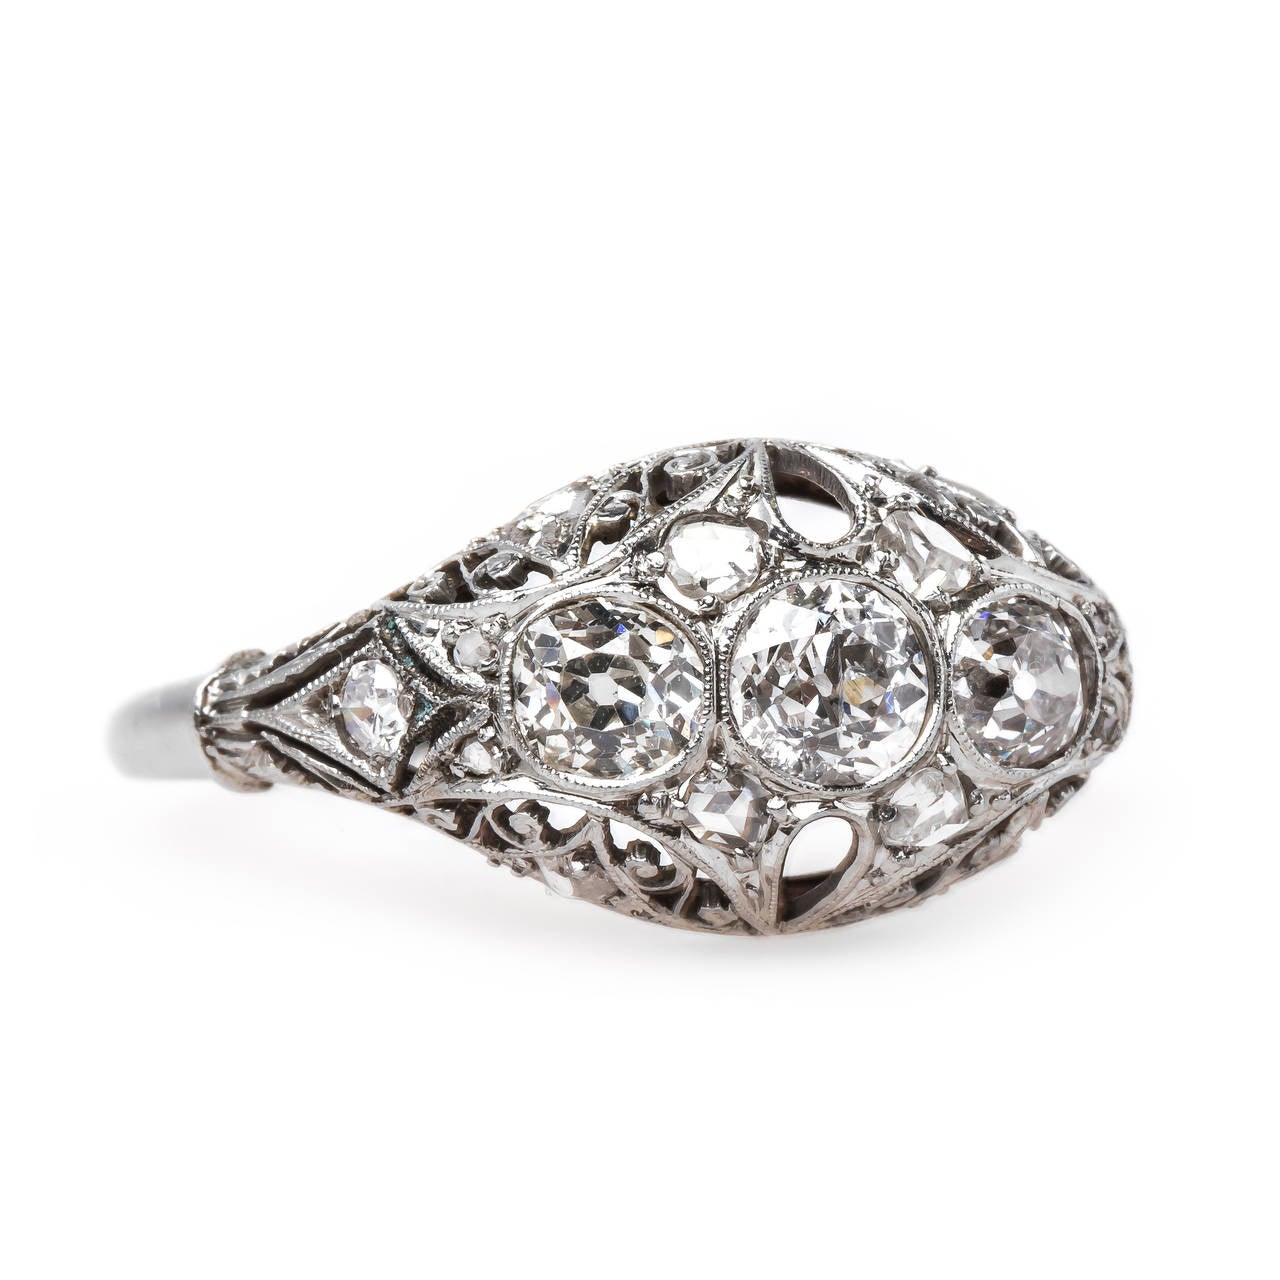 Silver Quill is an elegant and thoughtfully designed vintage Edwardian era (circa 1915) platinum three-stone engagement ring. The ring centers three Old Mine Cut diamonds totaling approximately 0.70ct in weight, surrounded by eight artistically